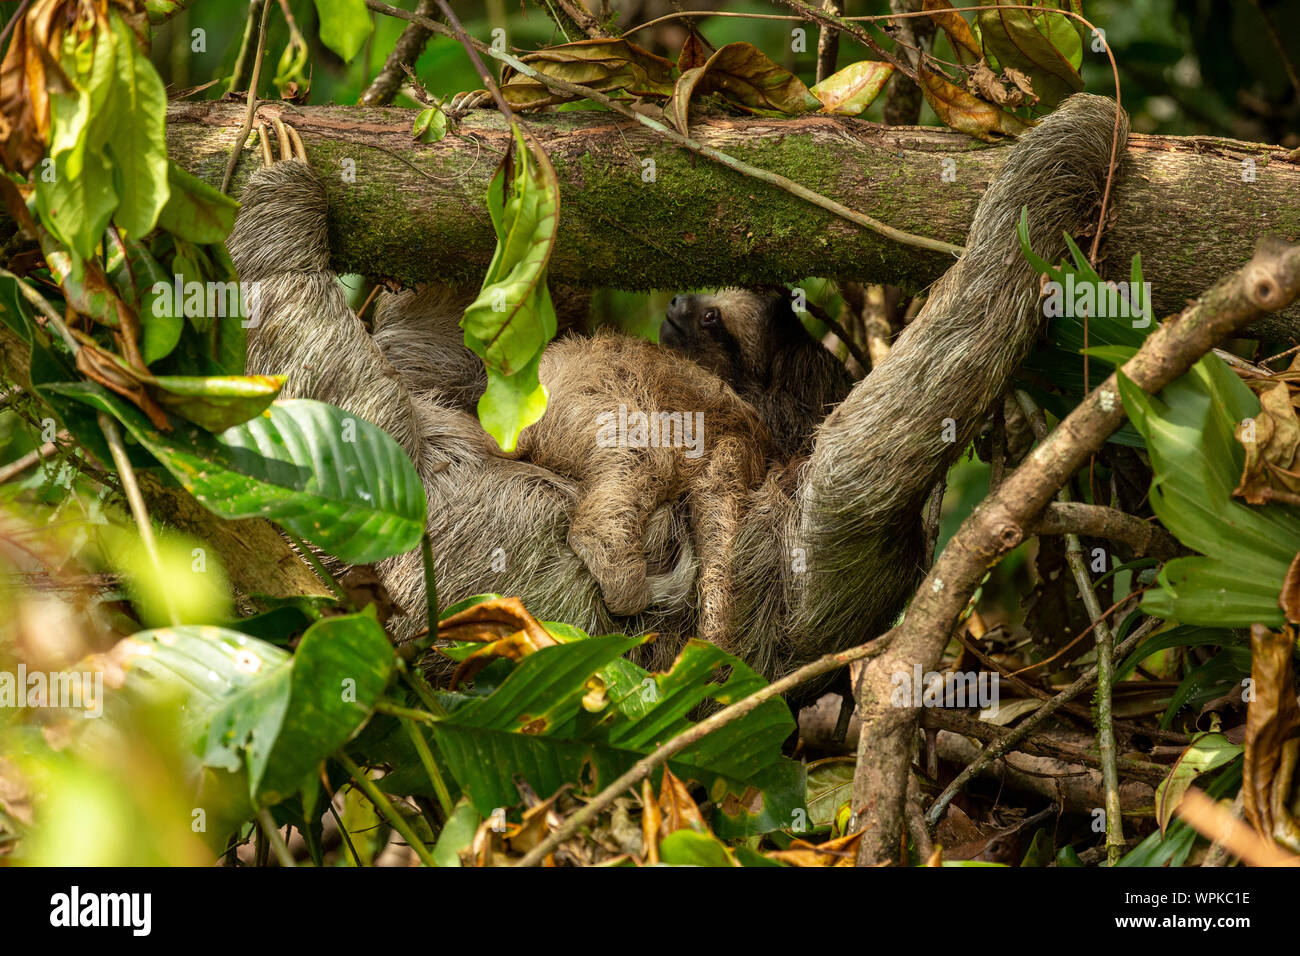 Three toed sloth with young baby wild free Corcovado national Park Costa Rica Central America Stock Photo